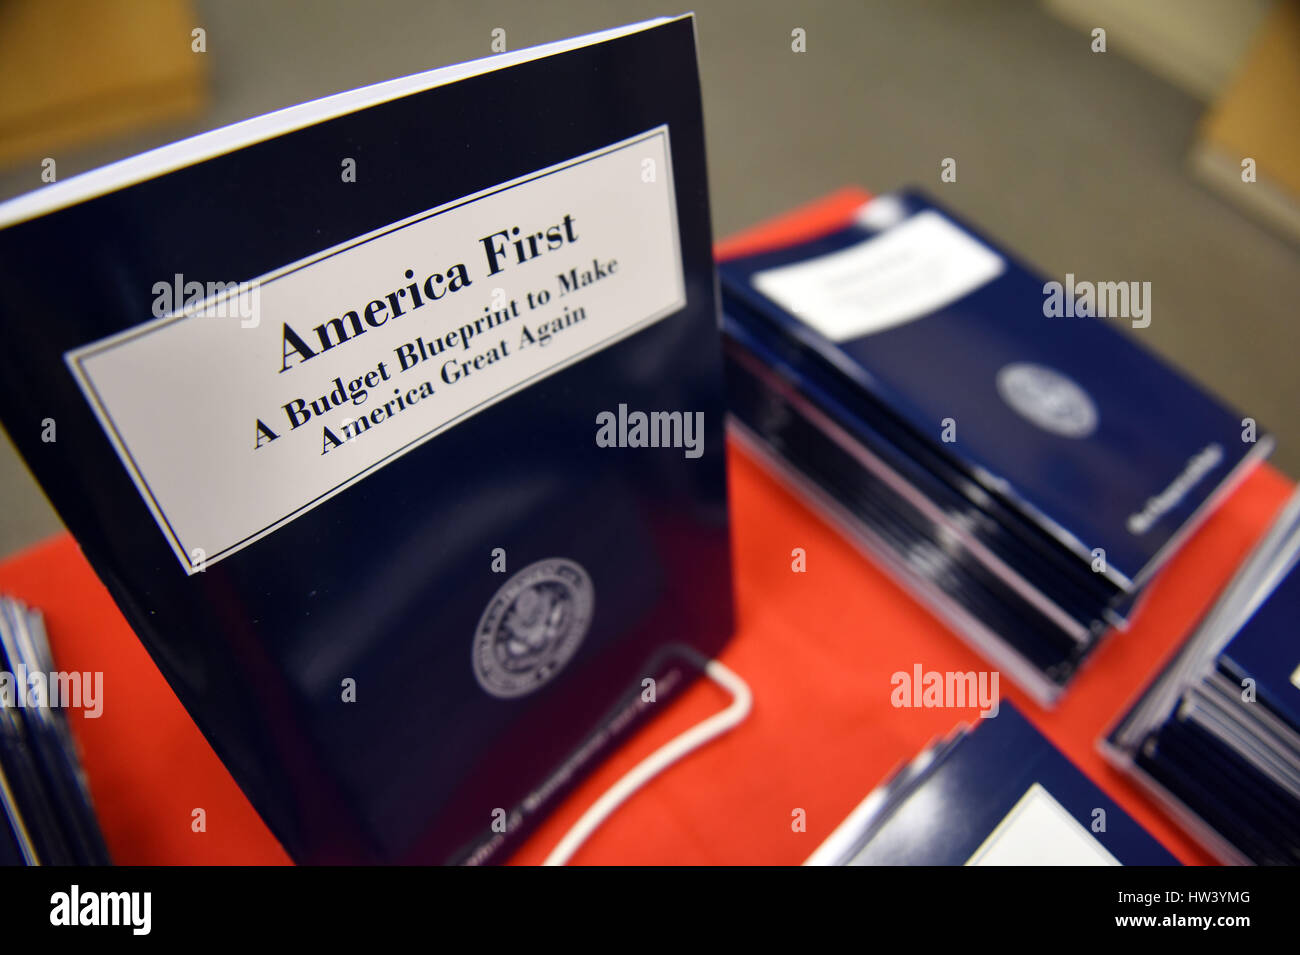 Washington, USA. 16th Mar, 2017. Copies of U.S. President Donald Trump administration's first budget blueprint are seen in Washington, DC, the United States, on March 16, 2017. U.S. President Donald Trump on Thursday unveiled the administration's first budget blueprint which seeks deep cuts across federal departments and agencies in order to fund rising defense spending. Credit: Yin Bogu/Xinhua/Alamy Live News Stock Photo